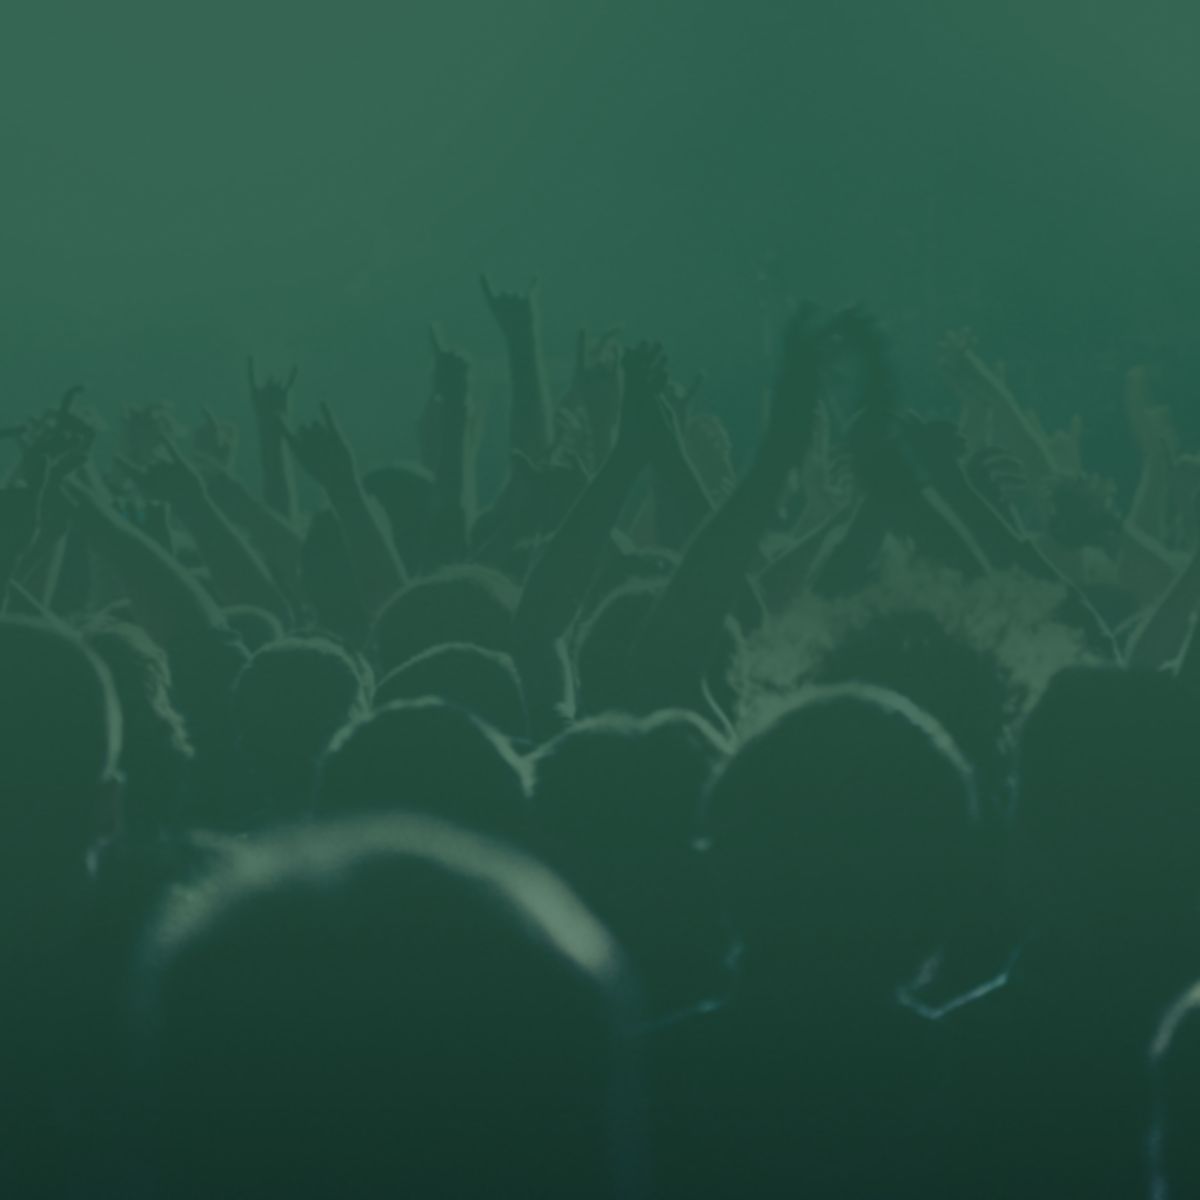 Heads and arms raised of a crowd of people dancing, the image has a green gradient.